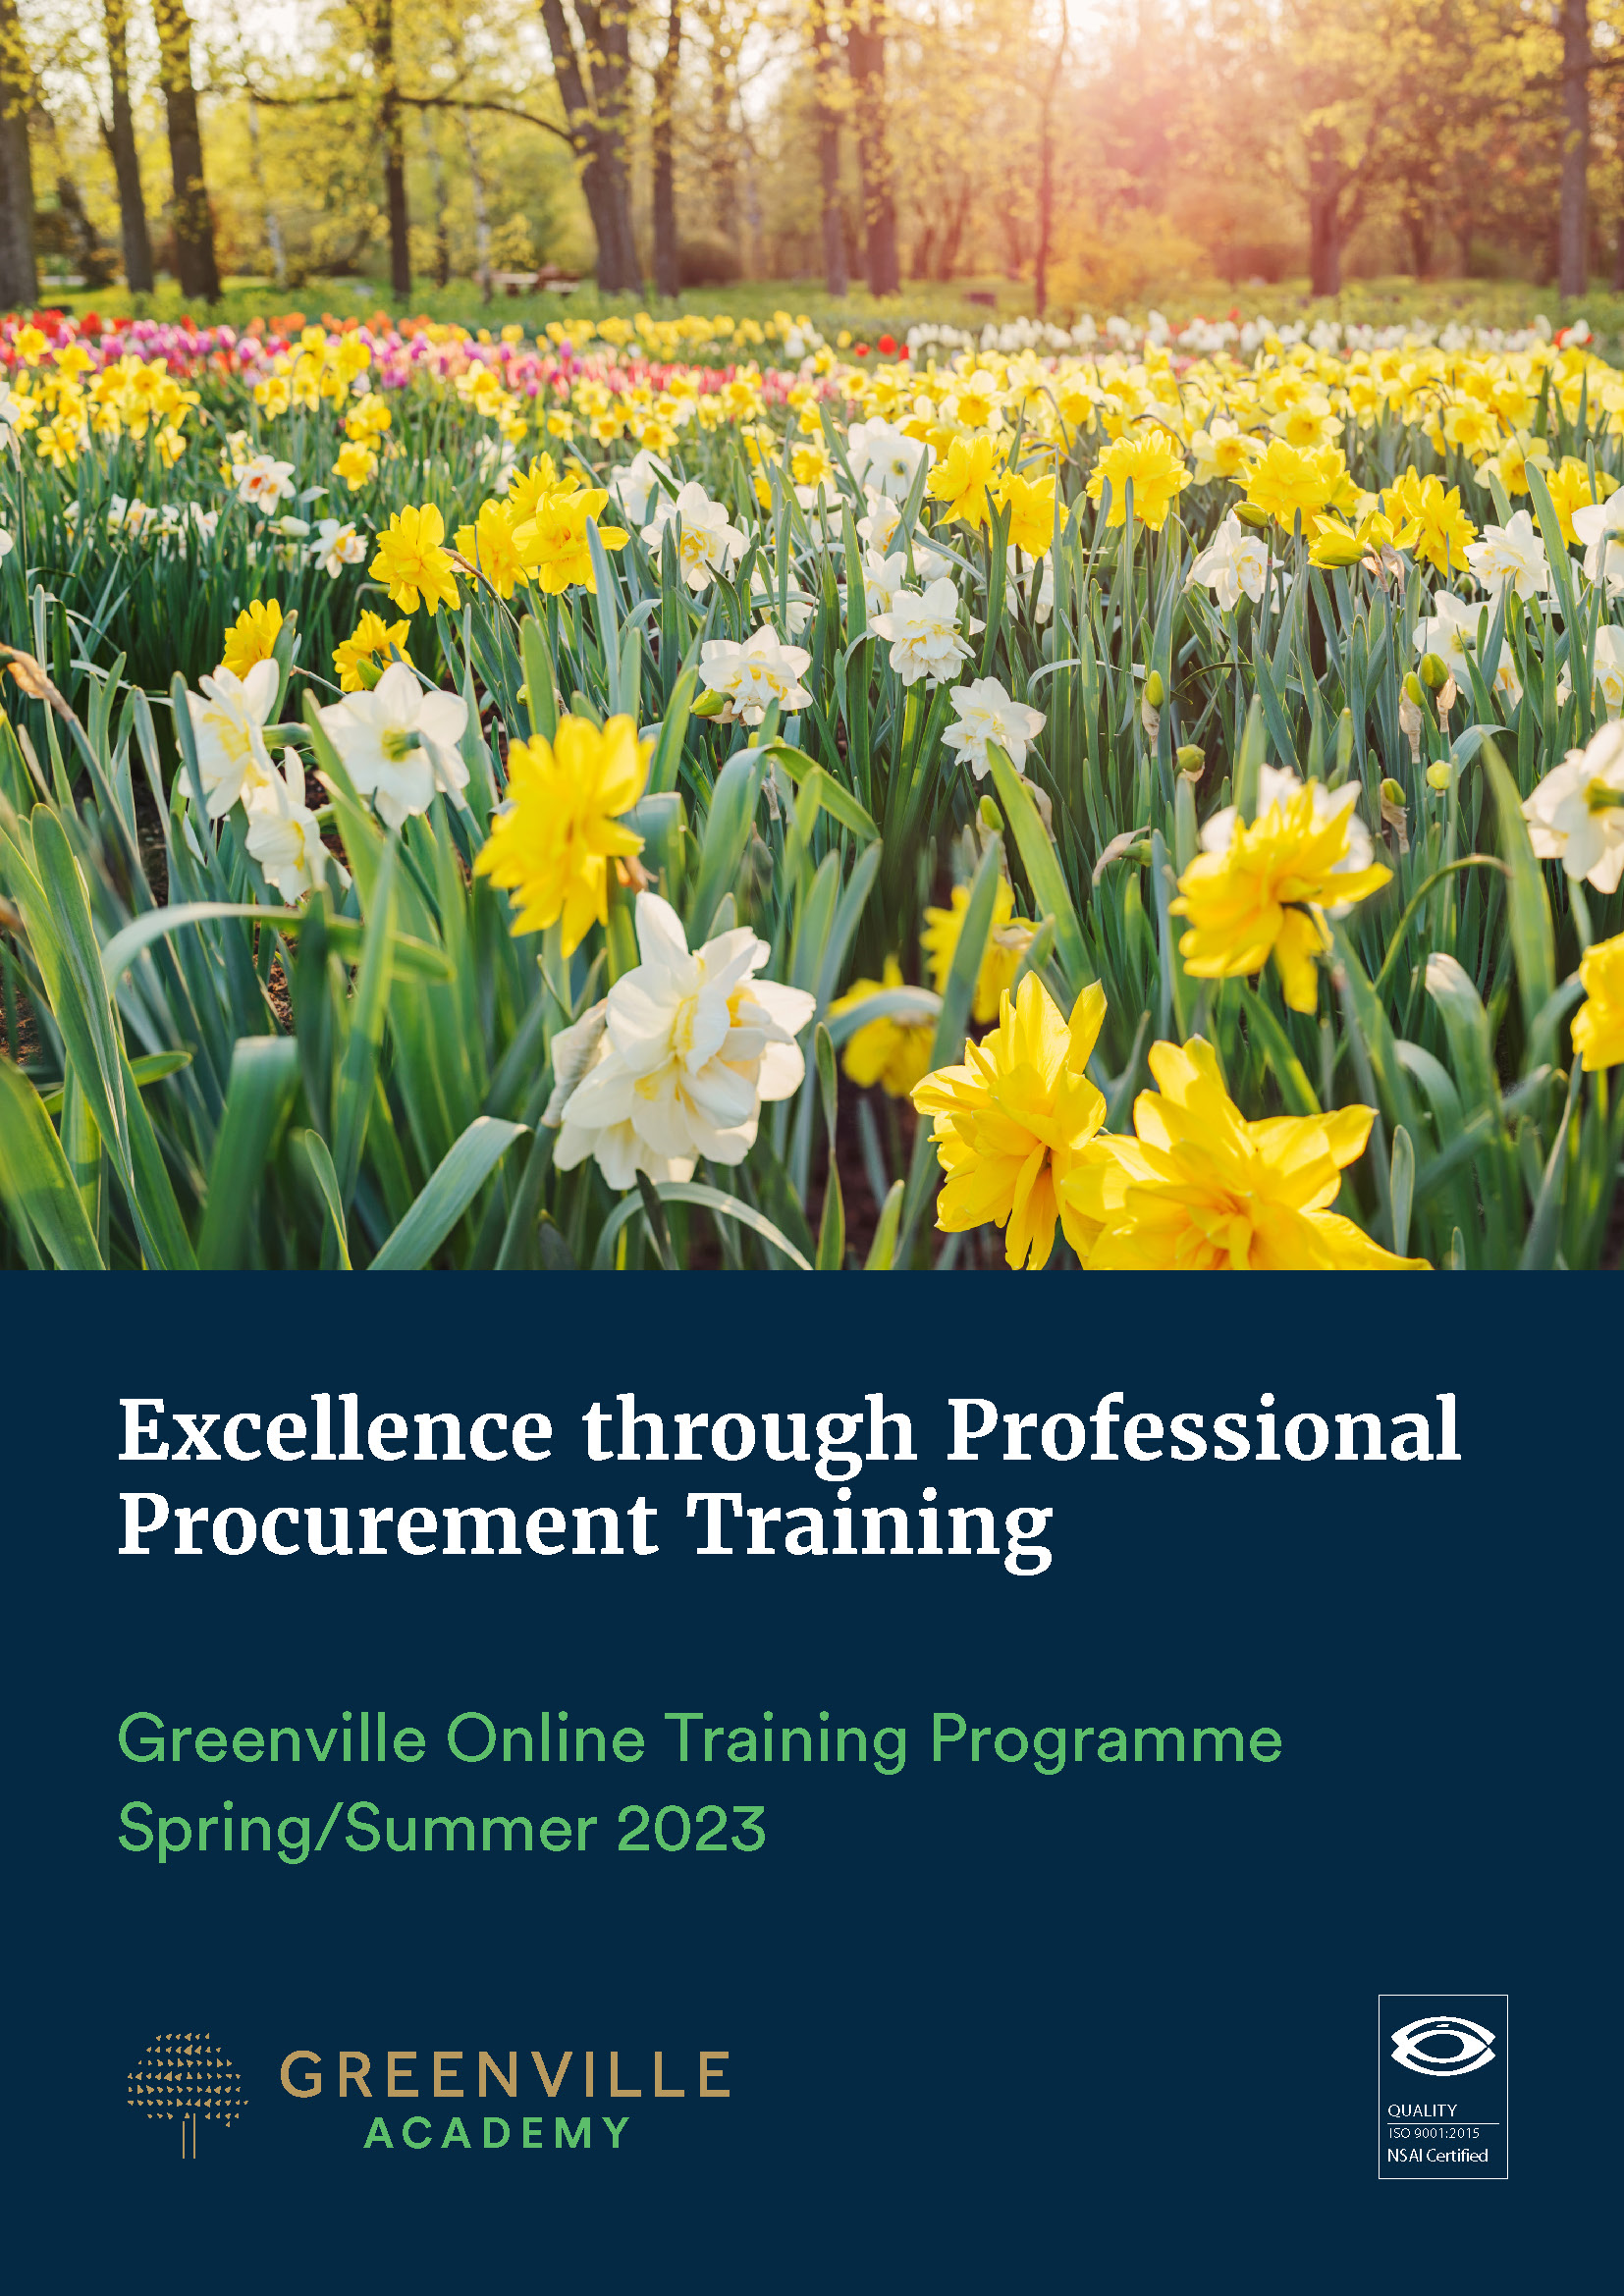 photo of training brochure cover with daffodils in a field